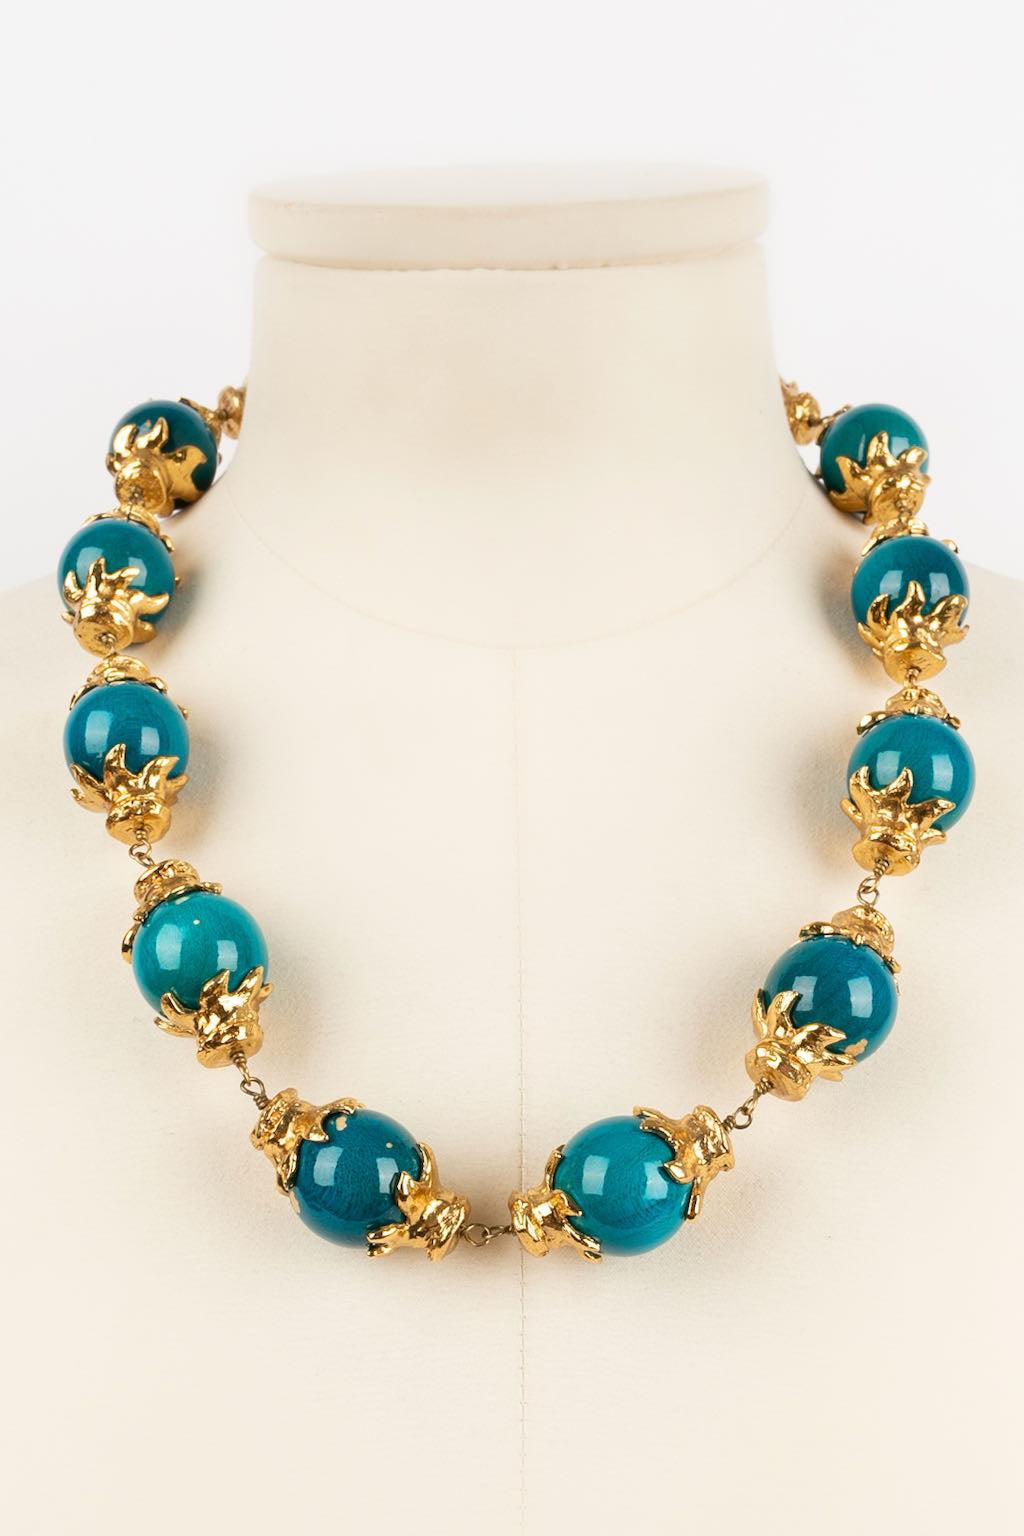 Yves Saint Laurent Gold Plated Metal Necklace with Wooden Beads In Good Condition For Sale In SAINT-OUEN-SUR-SEINE, FR